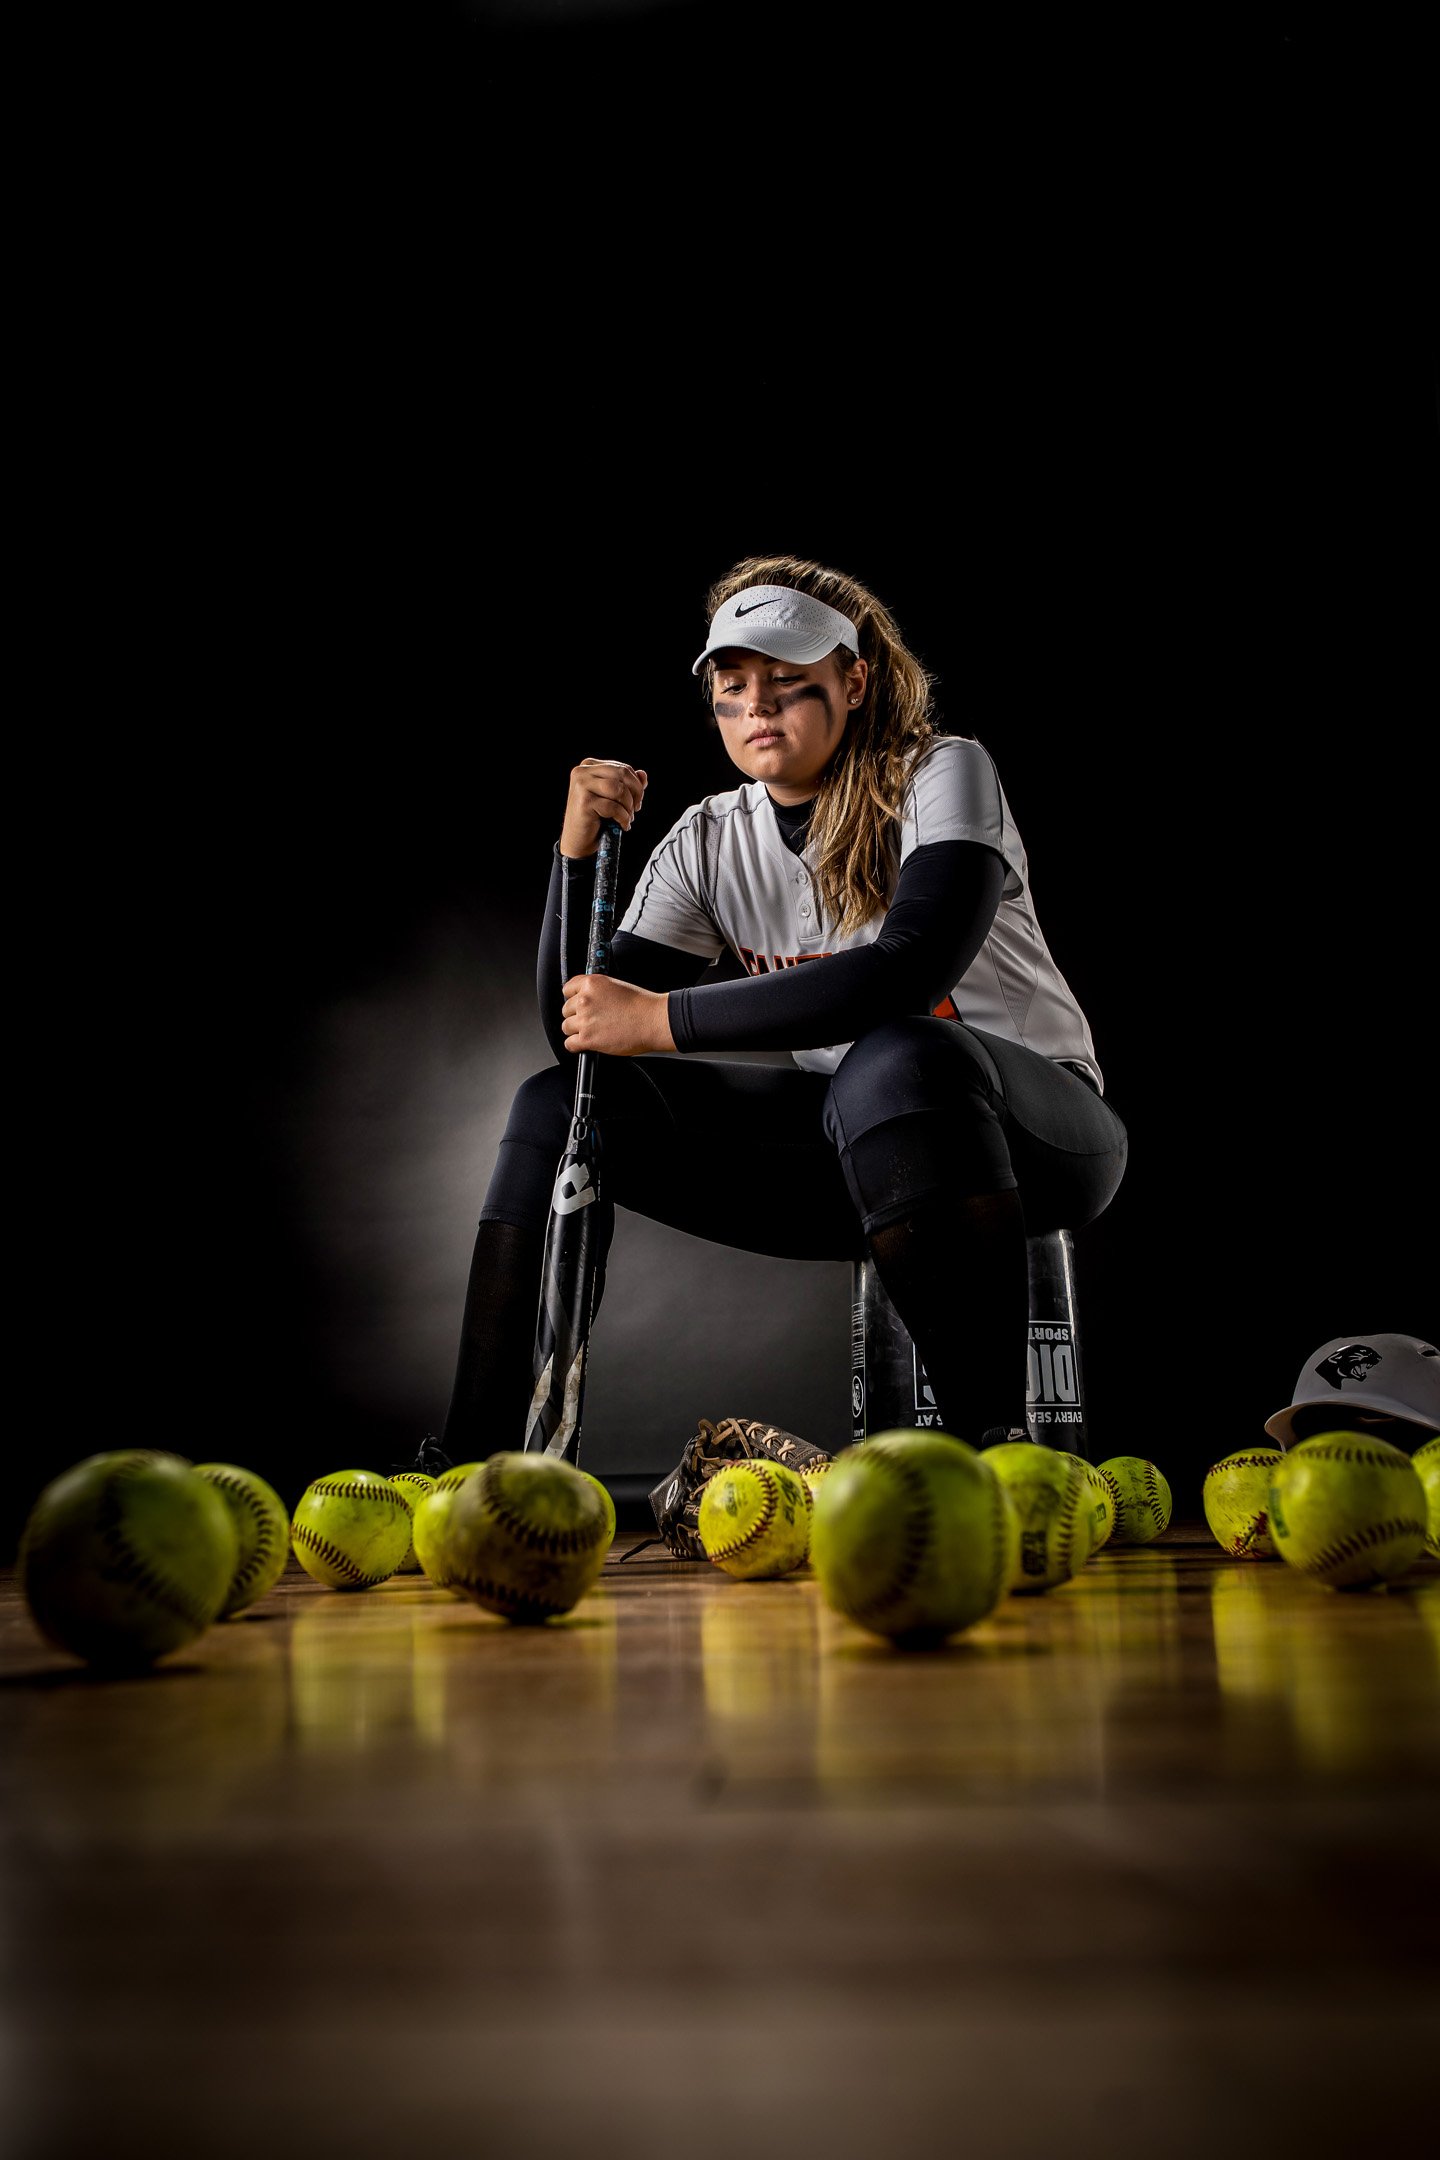 Softball player edgy in studio in uniform surrounded by softballs